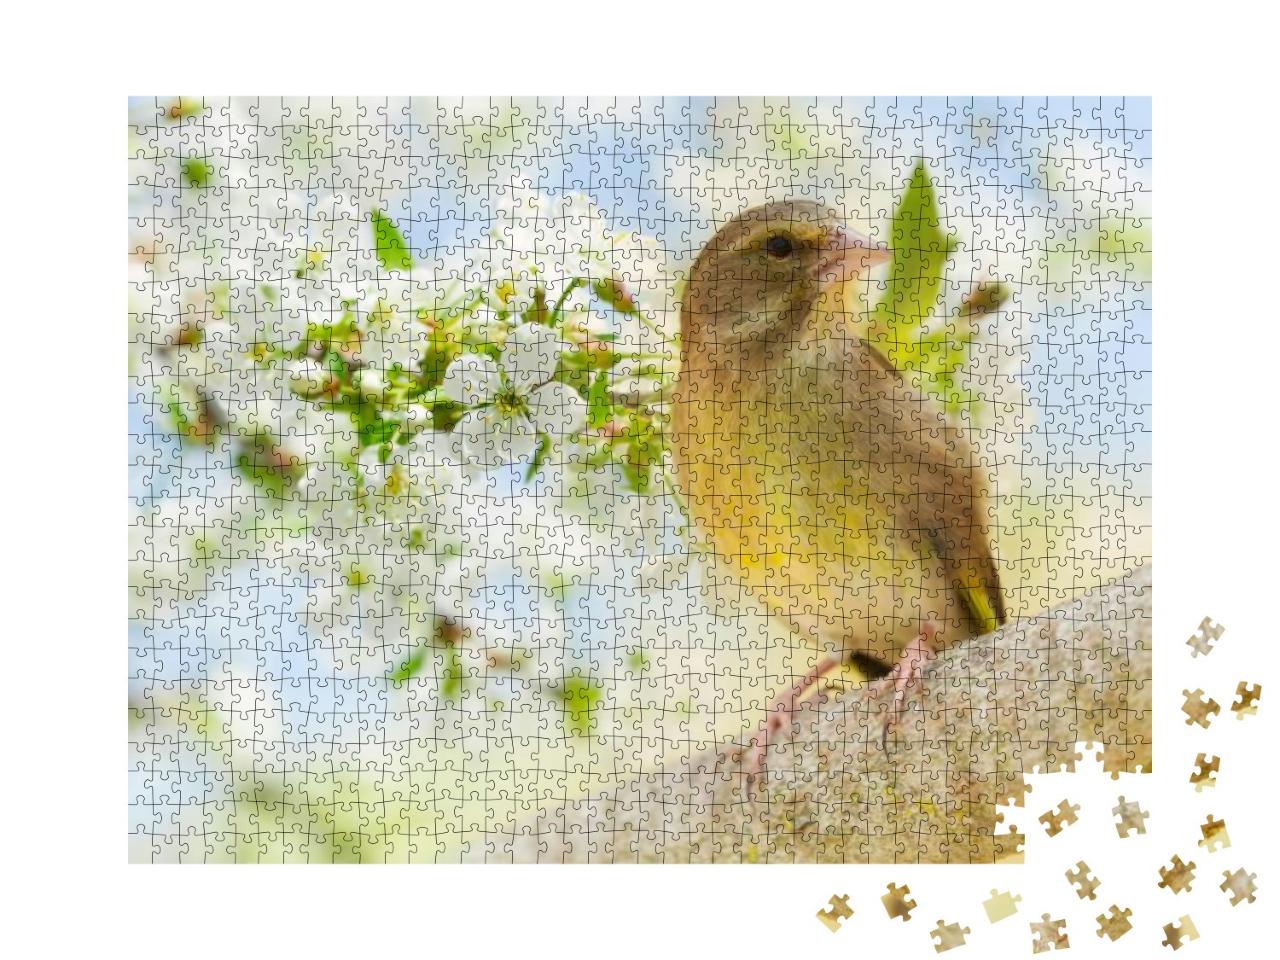 Little Songbird Perching on a Branch Over Blossoming Tree... Jigsaw Puzzle with 1000 pieces